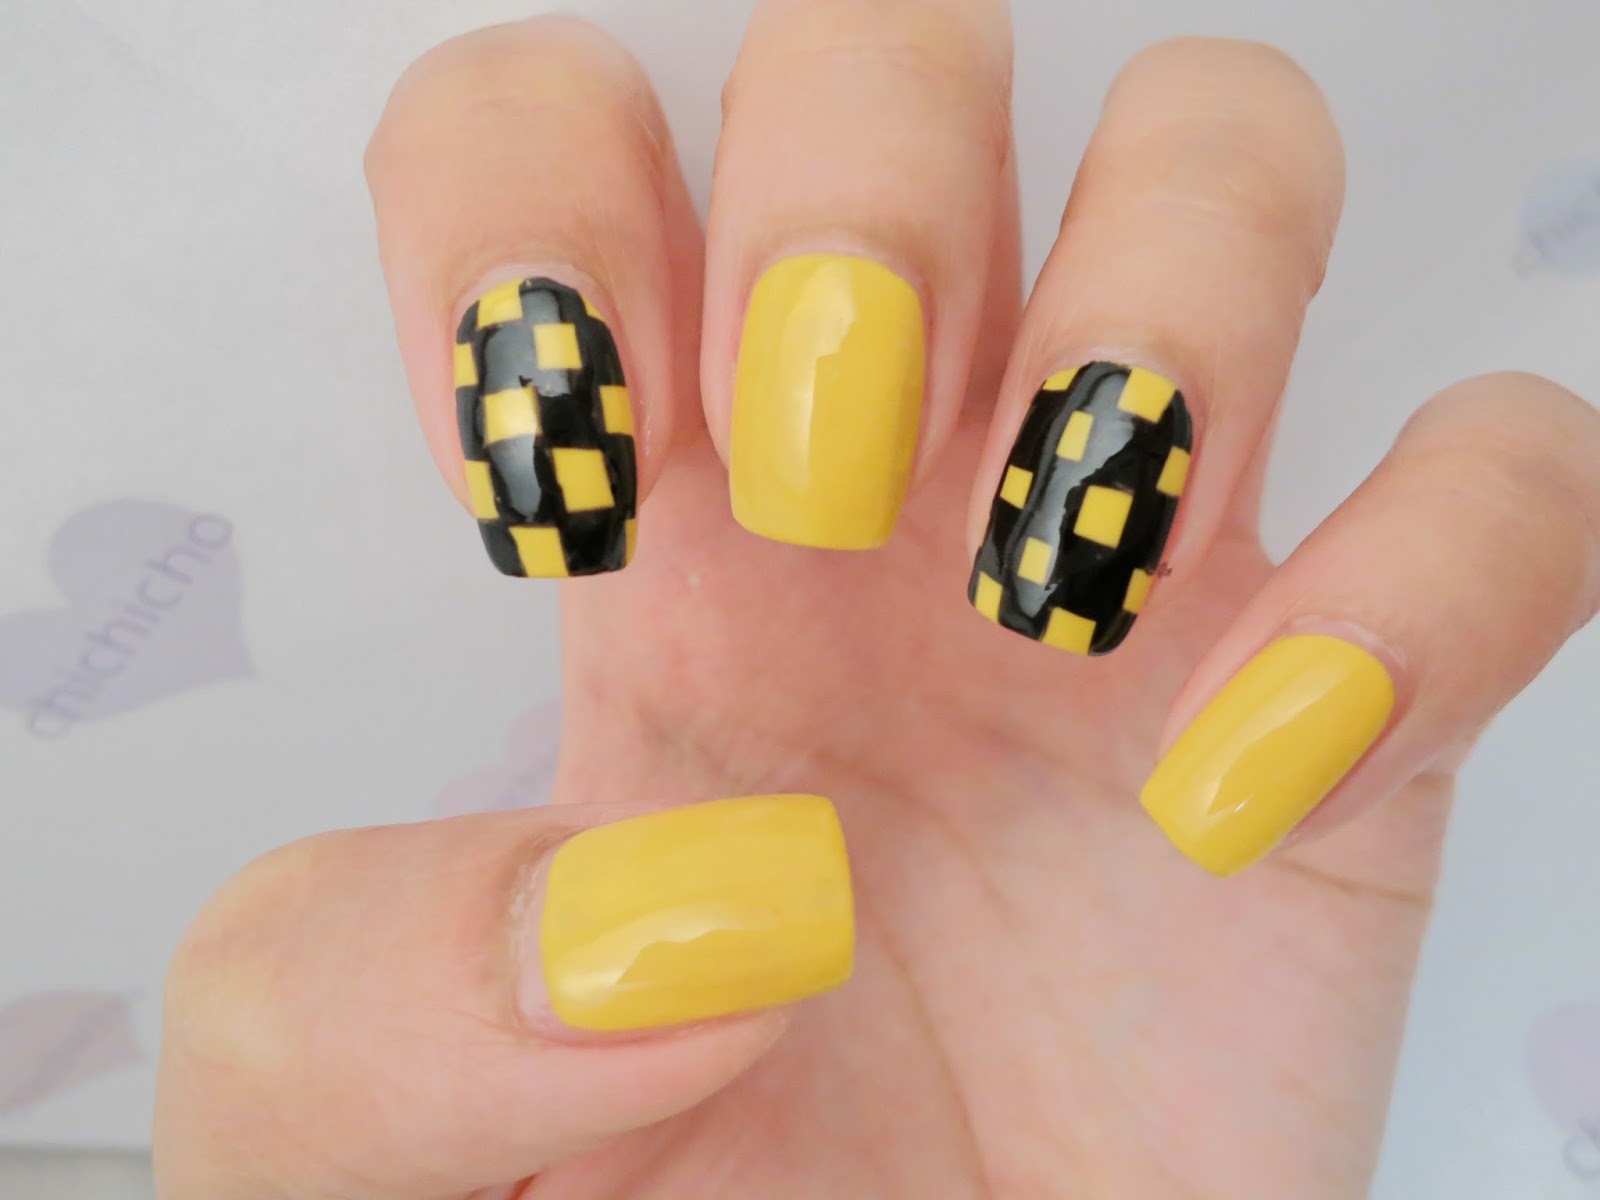 Black and Yellow Pedicure Nail Art - wide 8